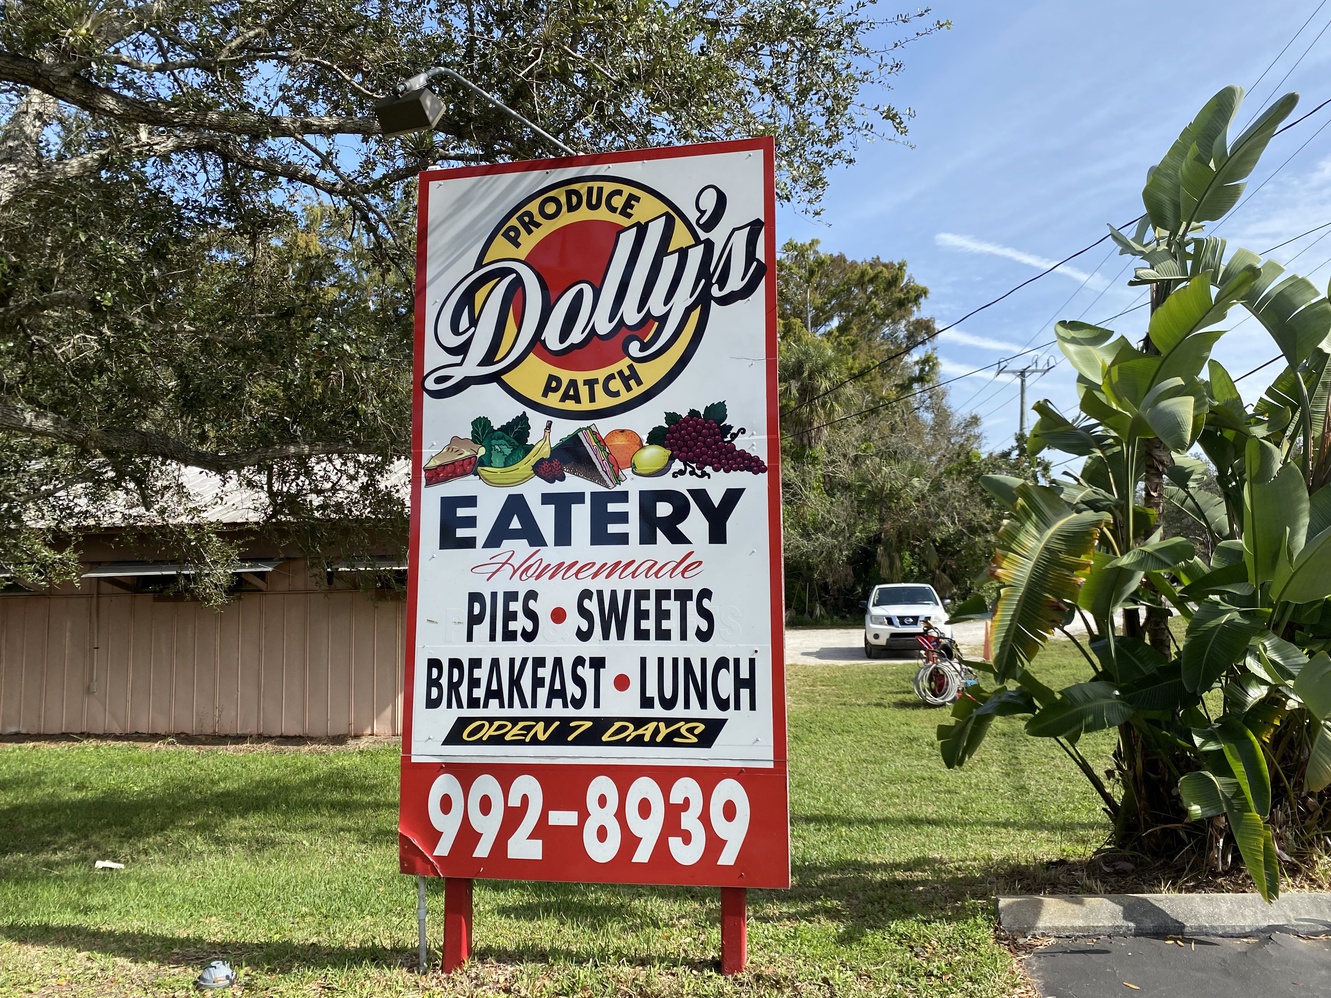 This is the sign for Dolly's Produce Patch & Eatery